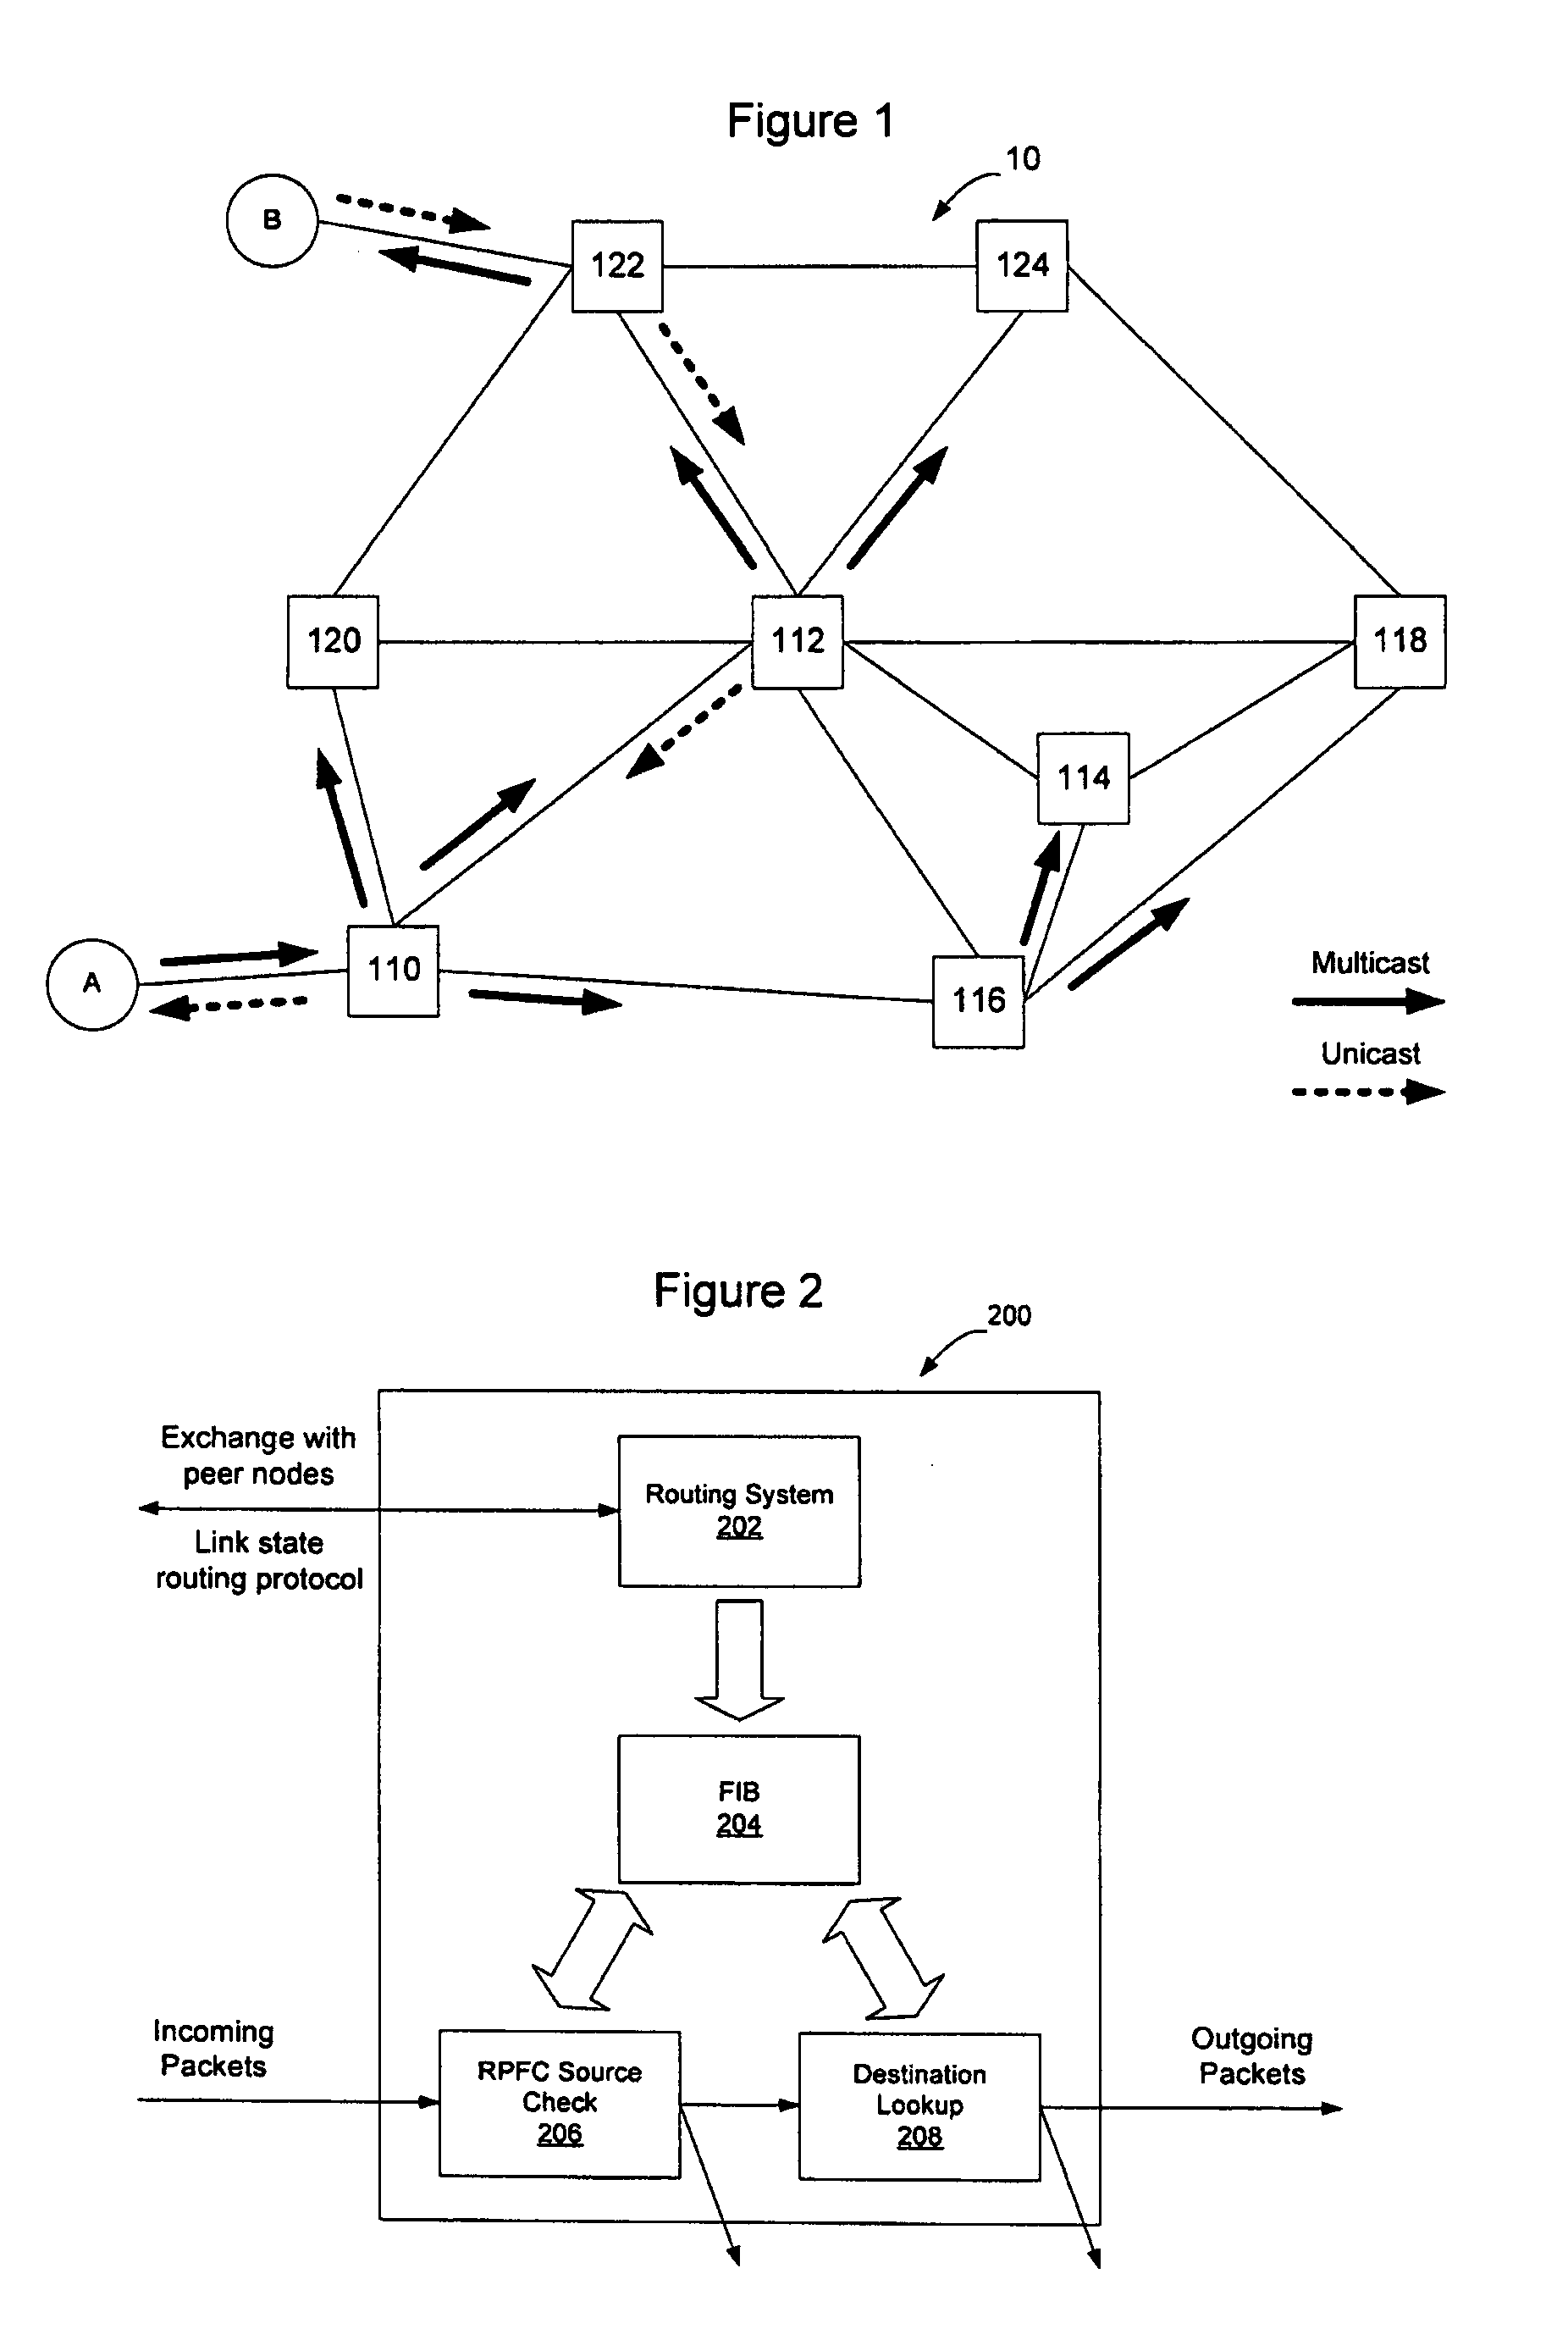 Multicast implementation in a link state protocol controlled ethernet network